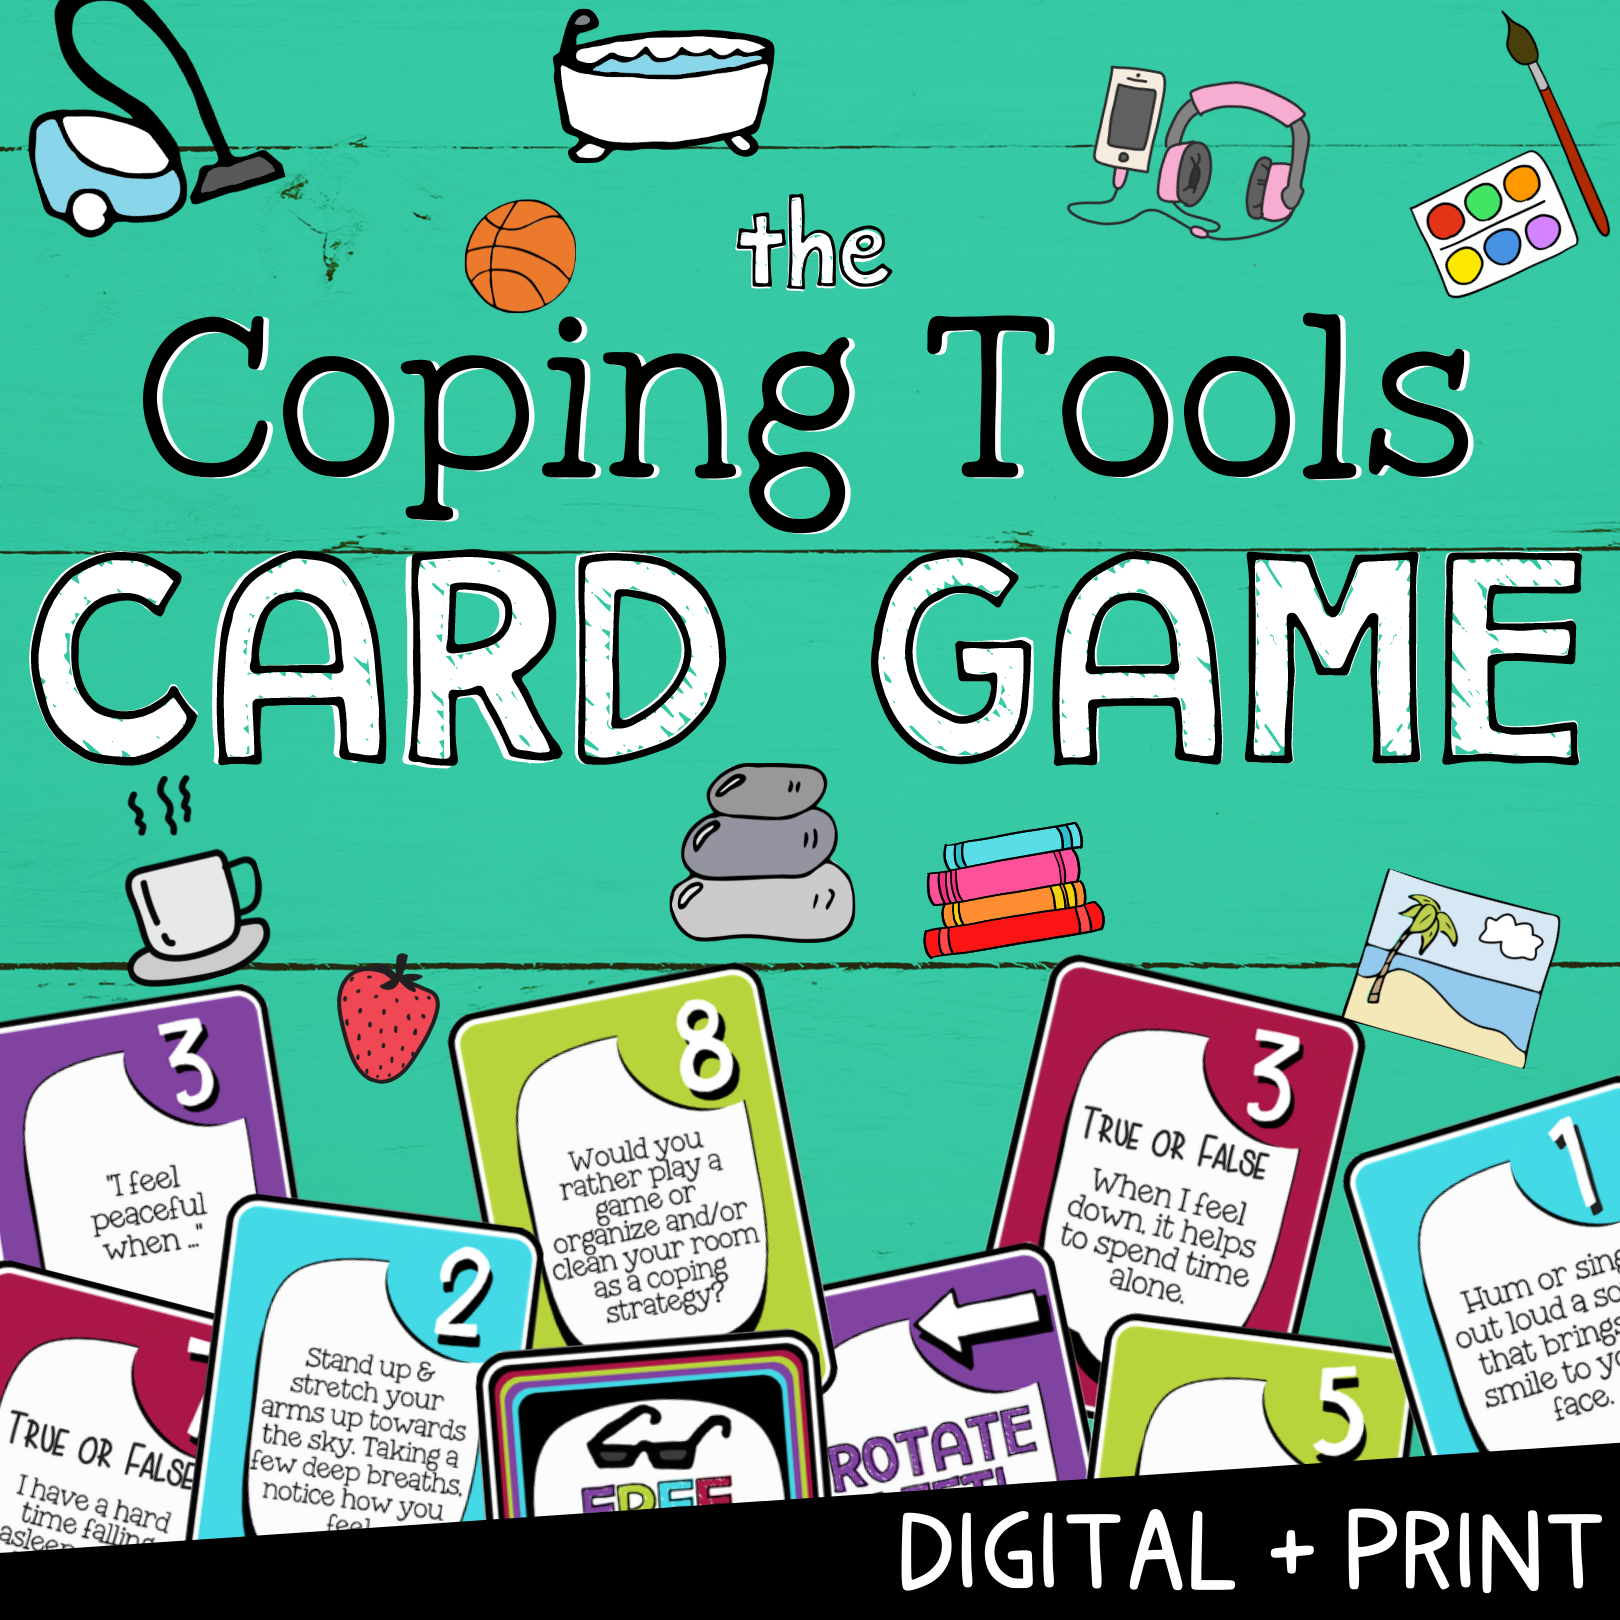 Coping Tools Game for Kids Self-Control Small Group Activity